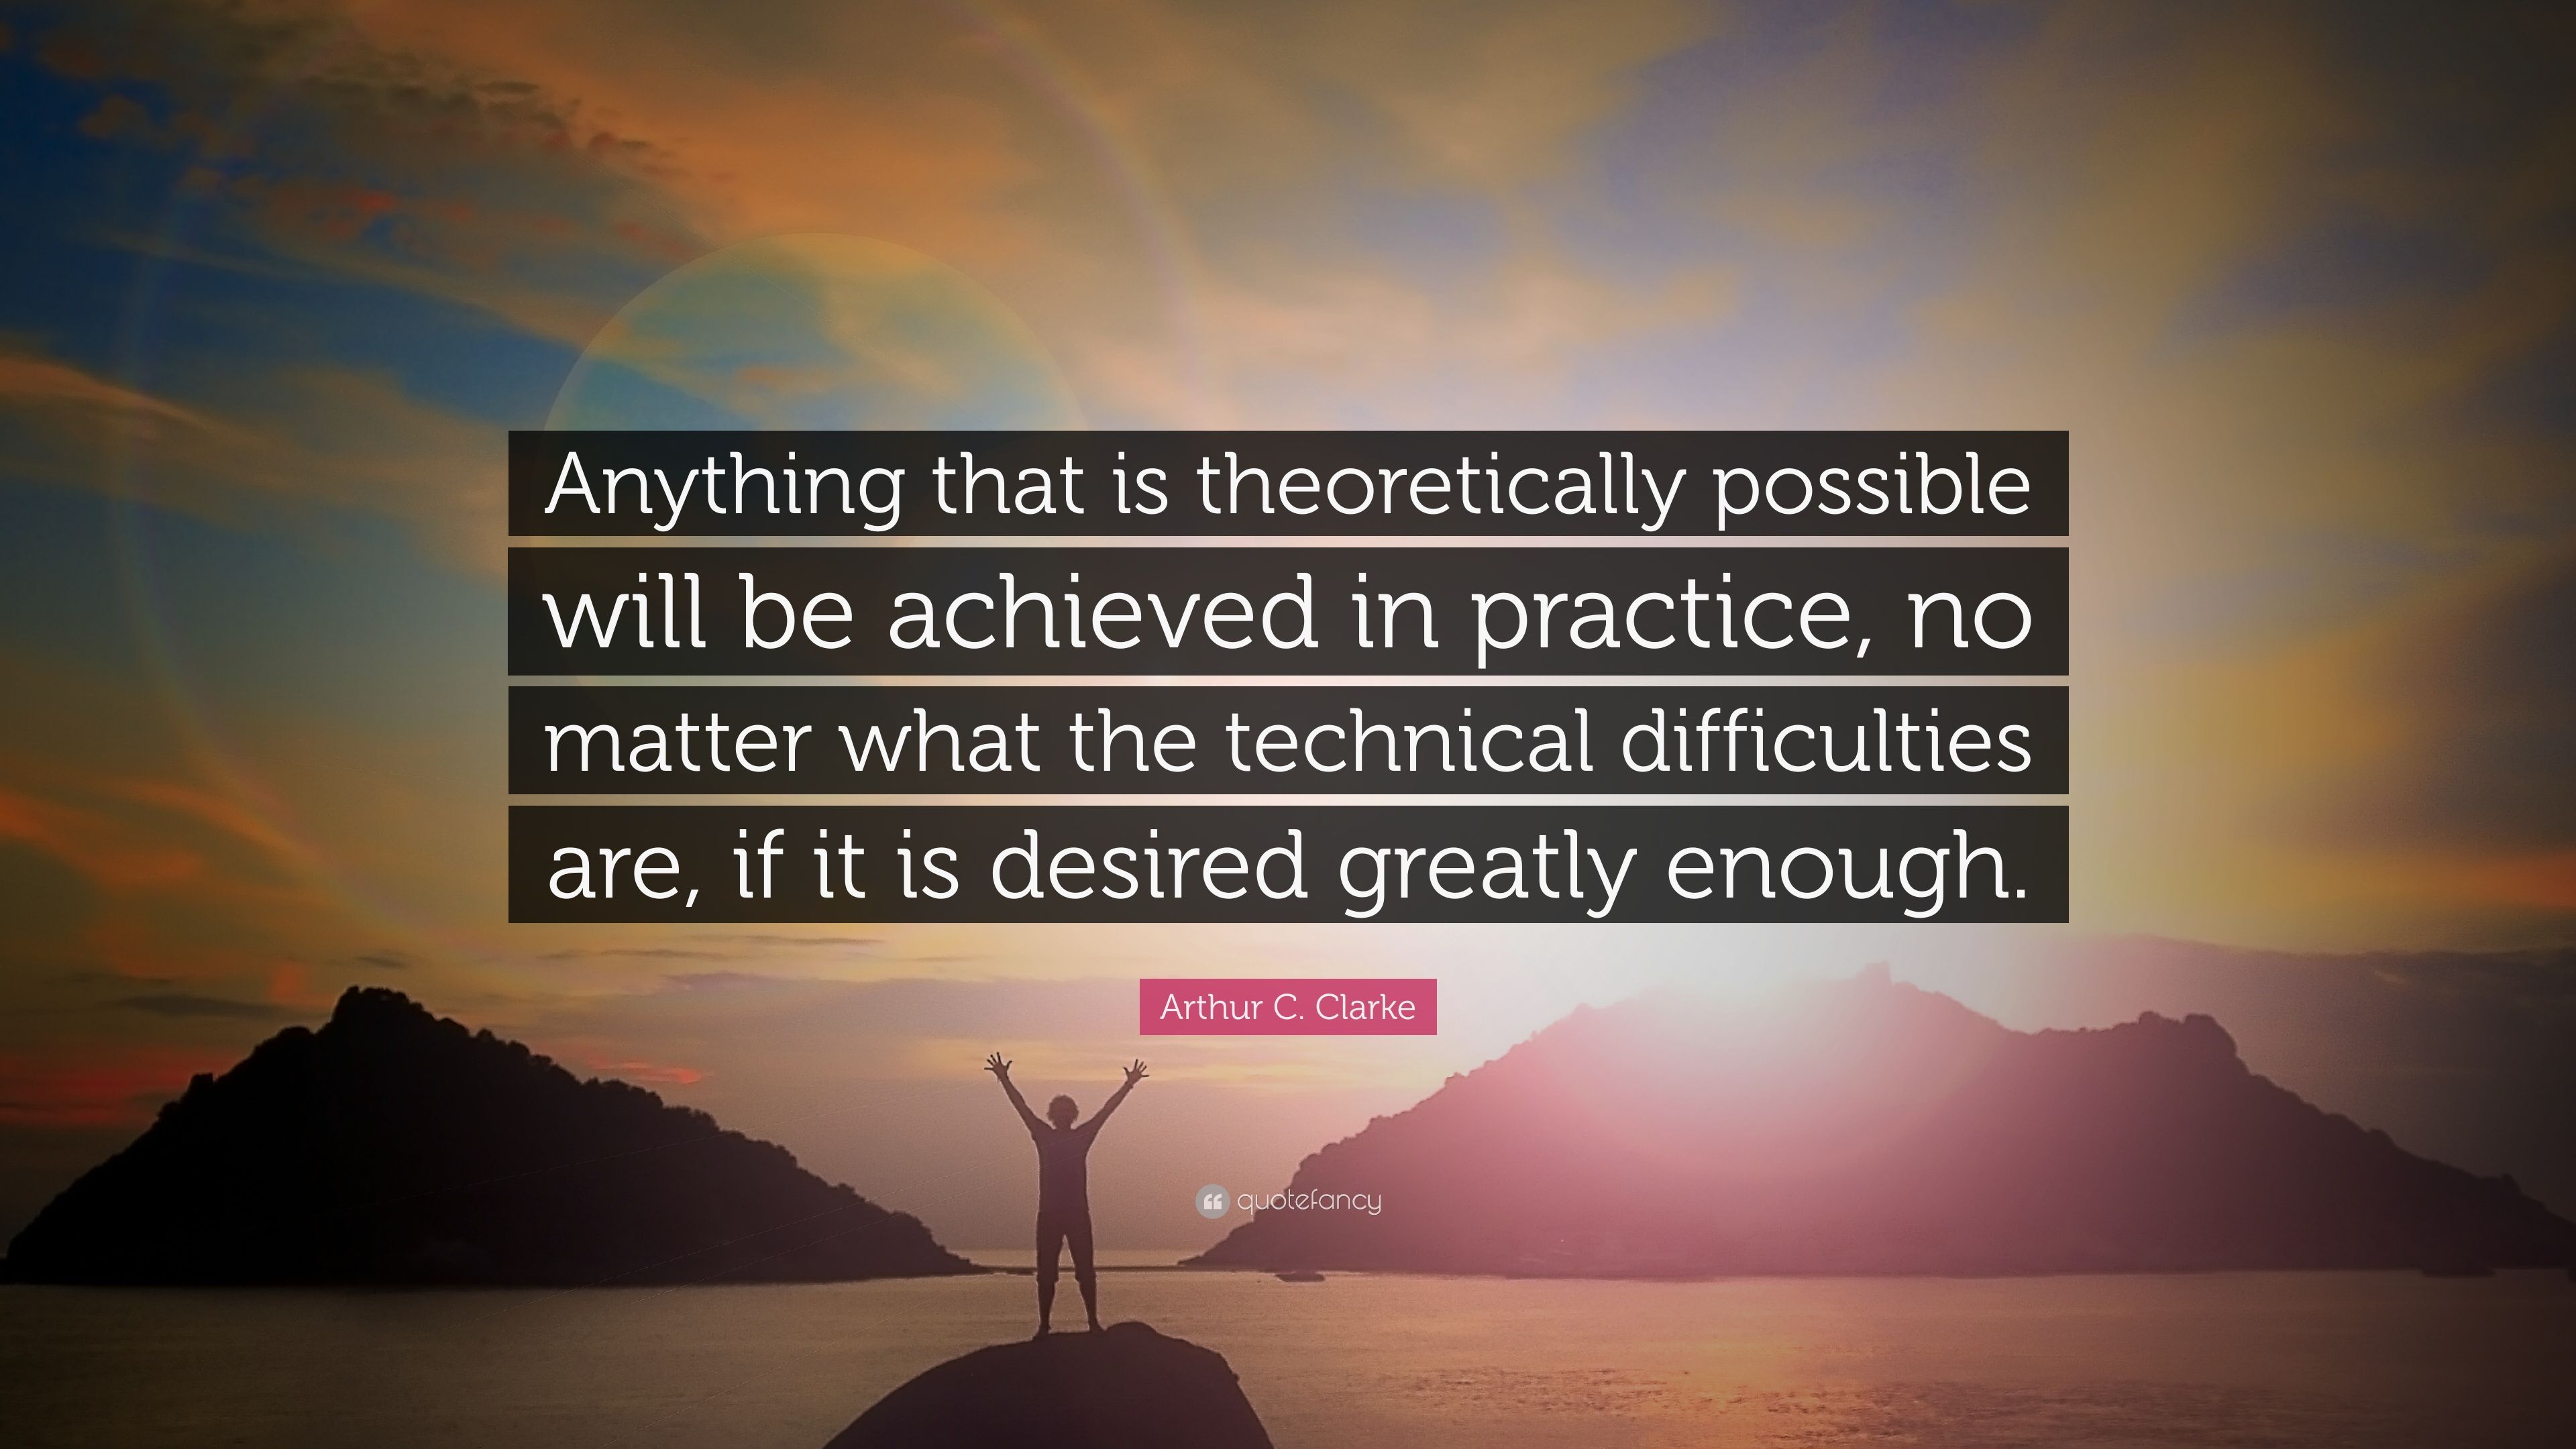 Arthur C. Clarke Quote: “Anything that is theoretically possible will be achieved in practice, no matter what the technical difficulties are, if .”